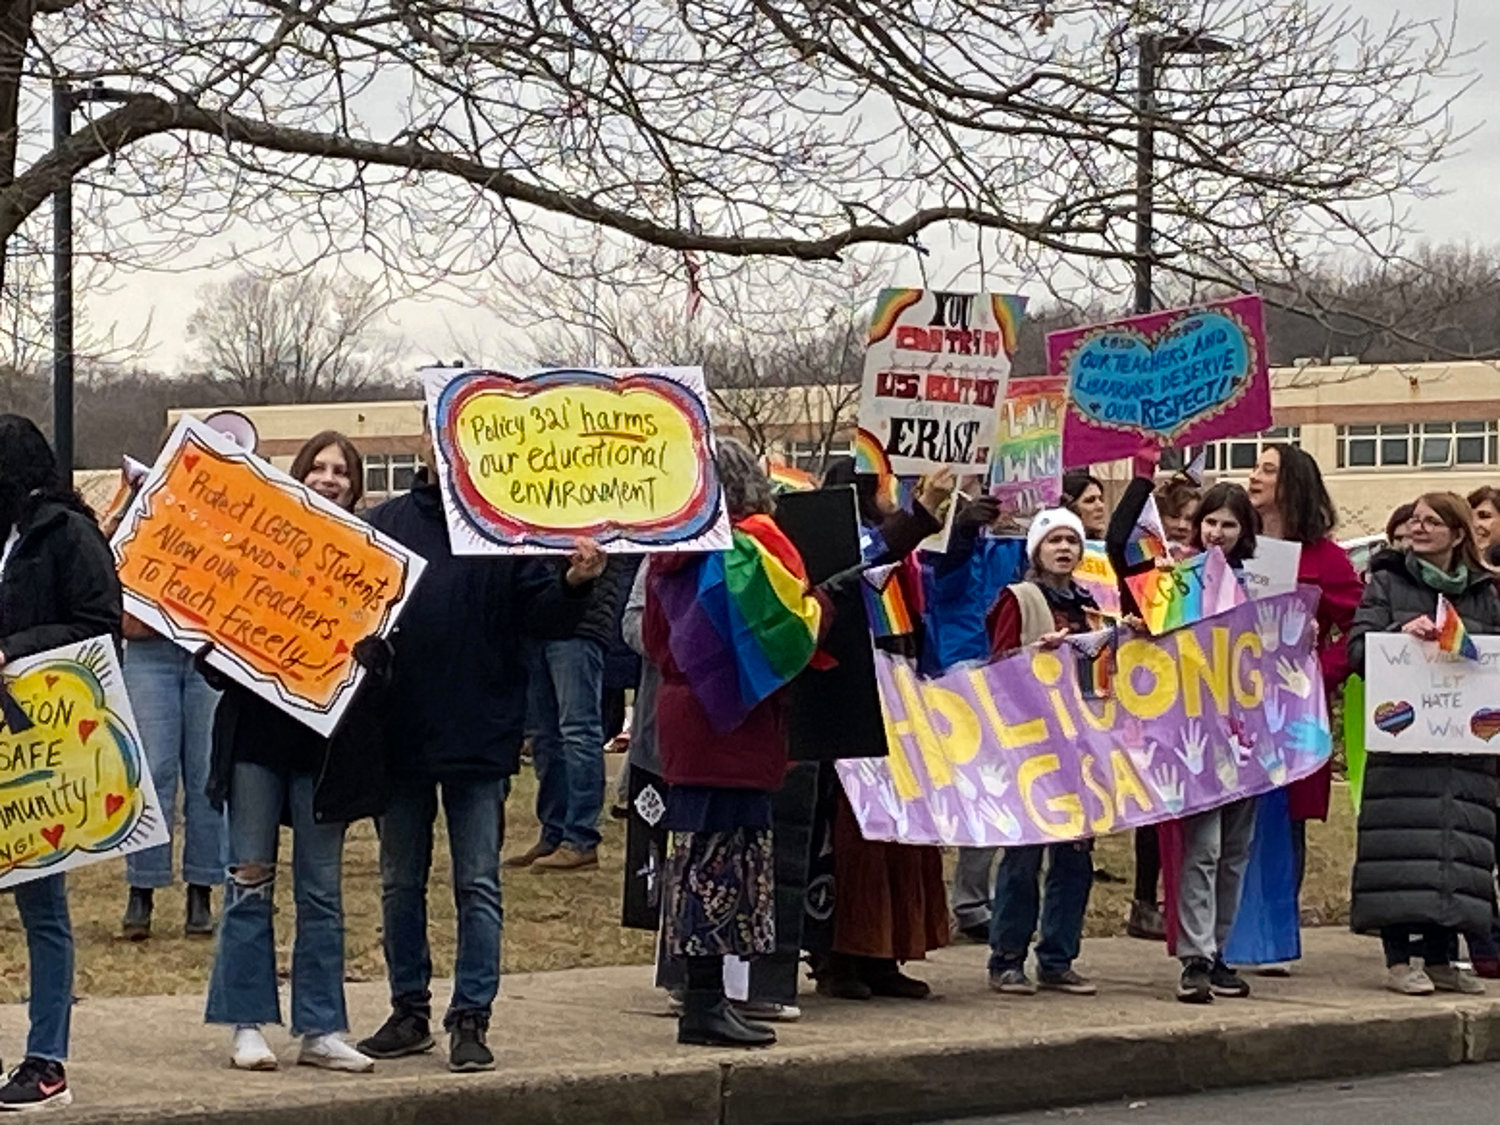 Protesters gathered outside Central Bucks East High School Tuesday to show unity and call for an end to a new district policy that requires Pride flags and other items be removed from classrooms.